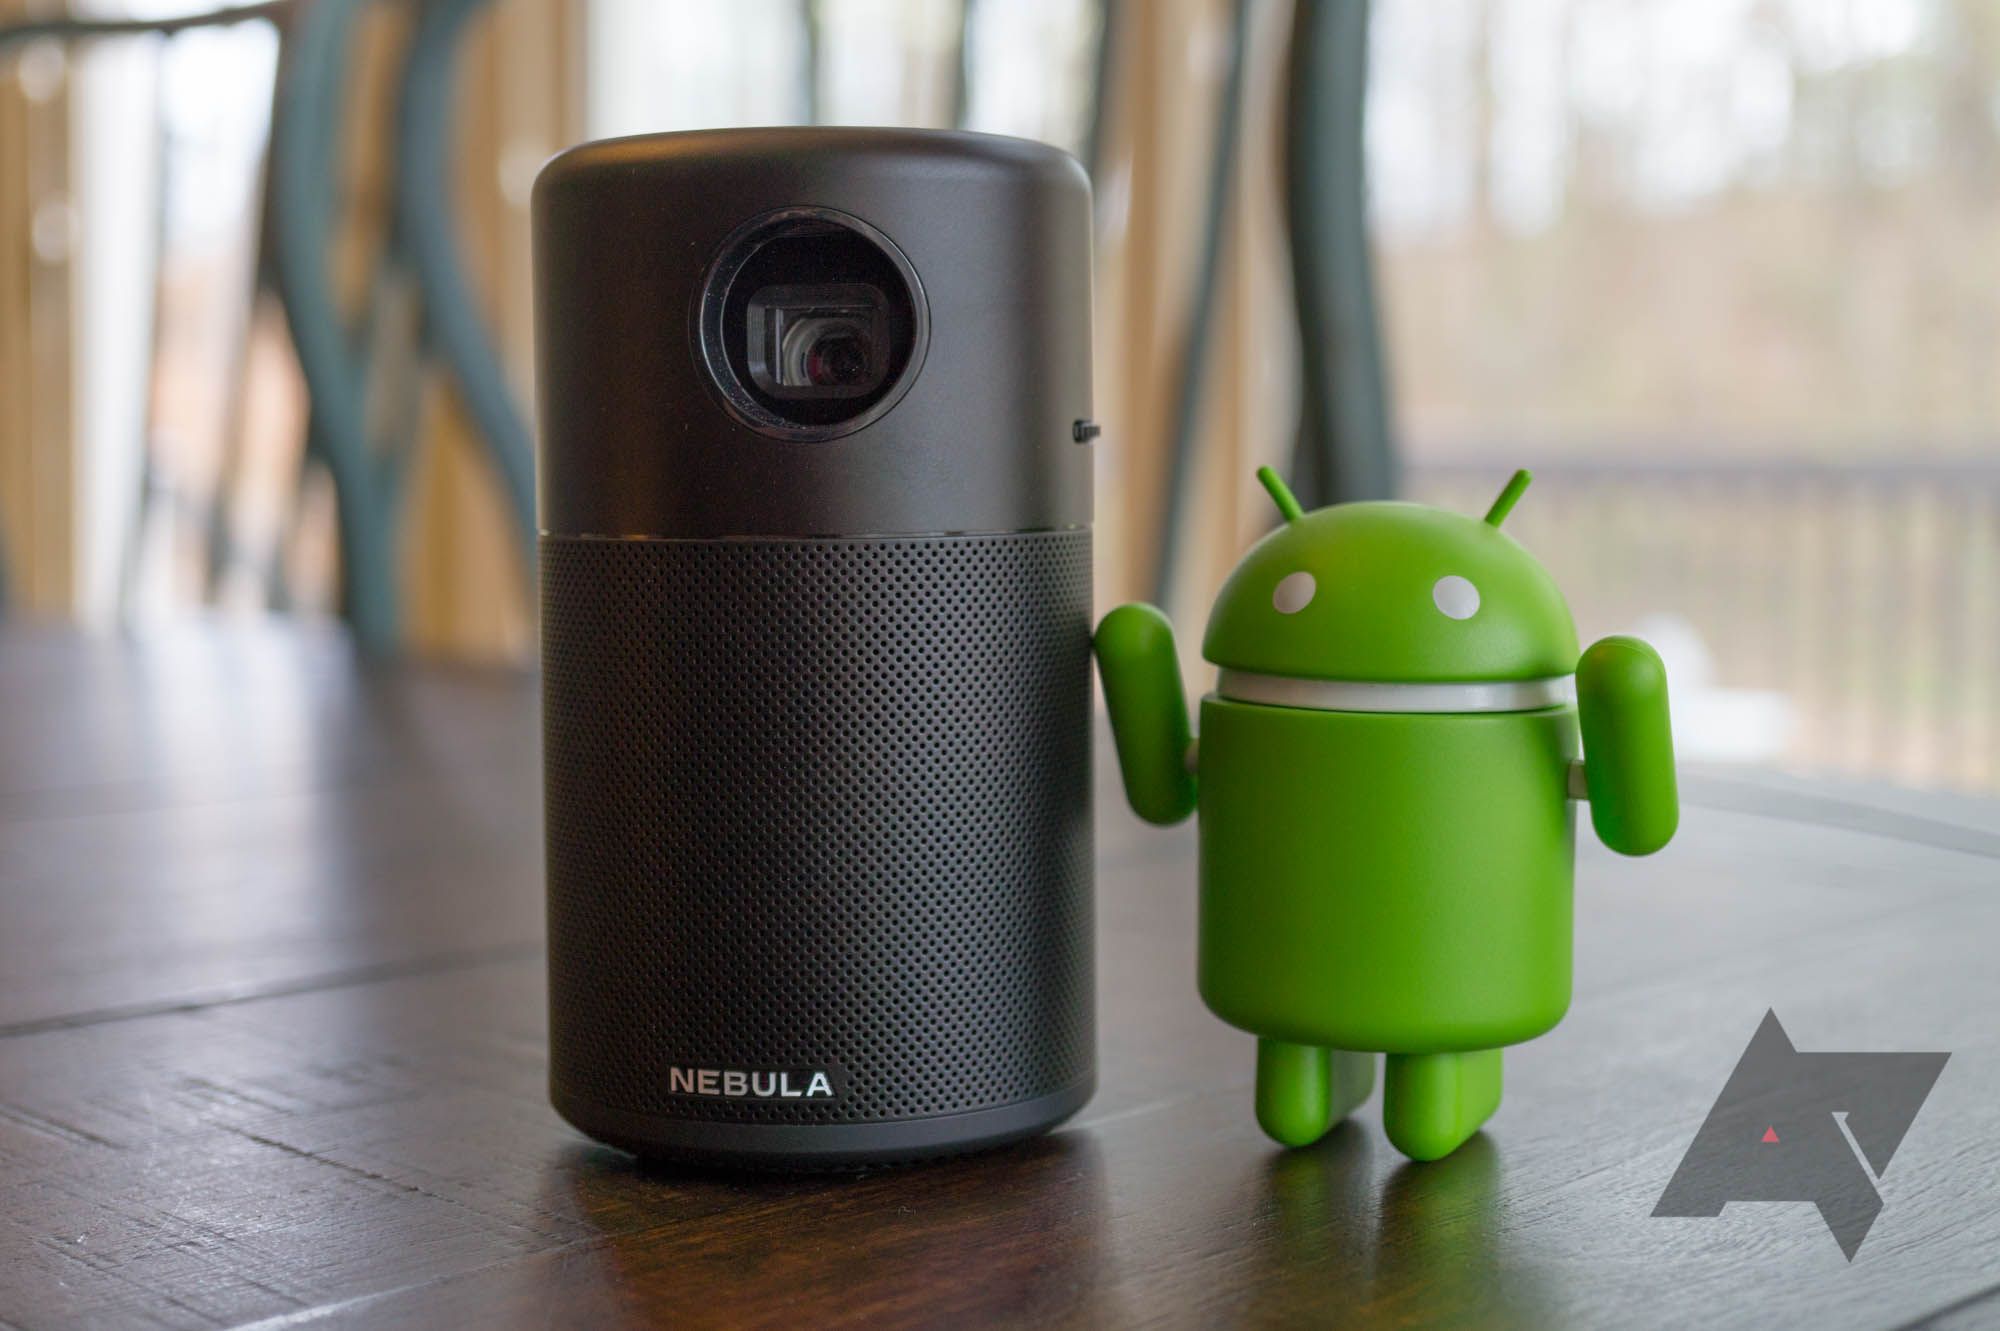 Anker Nebula Capsule review: The best portable projector, but it 